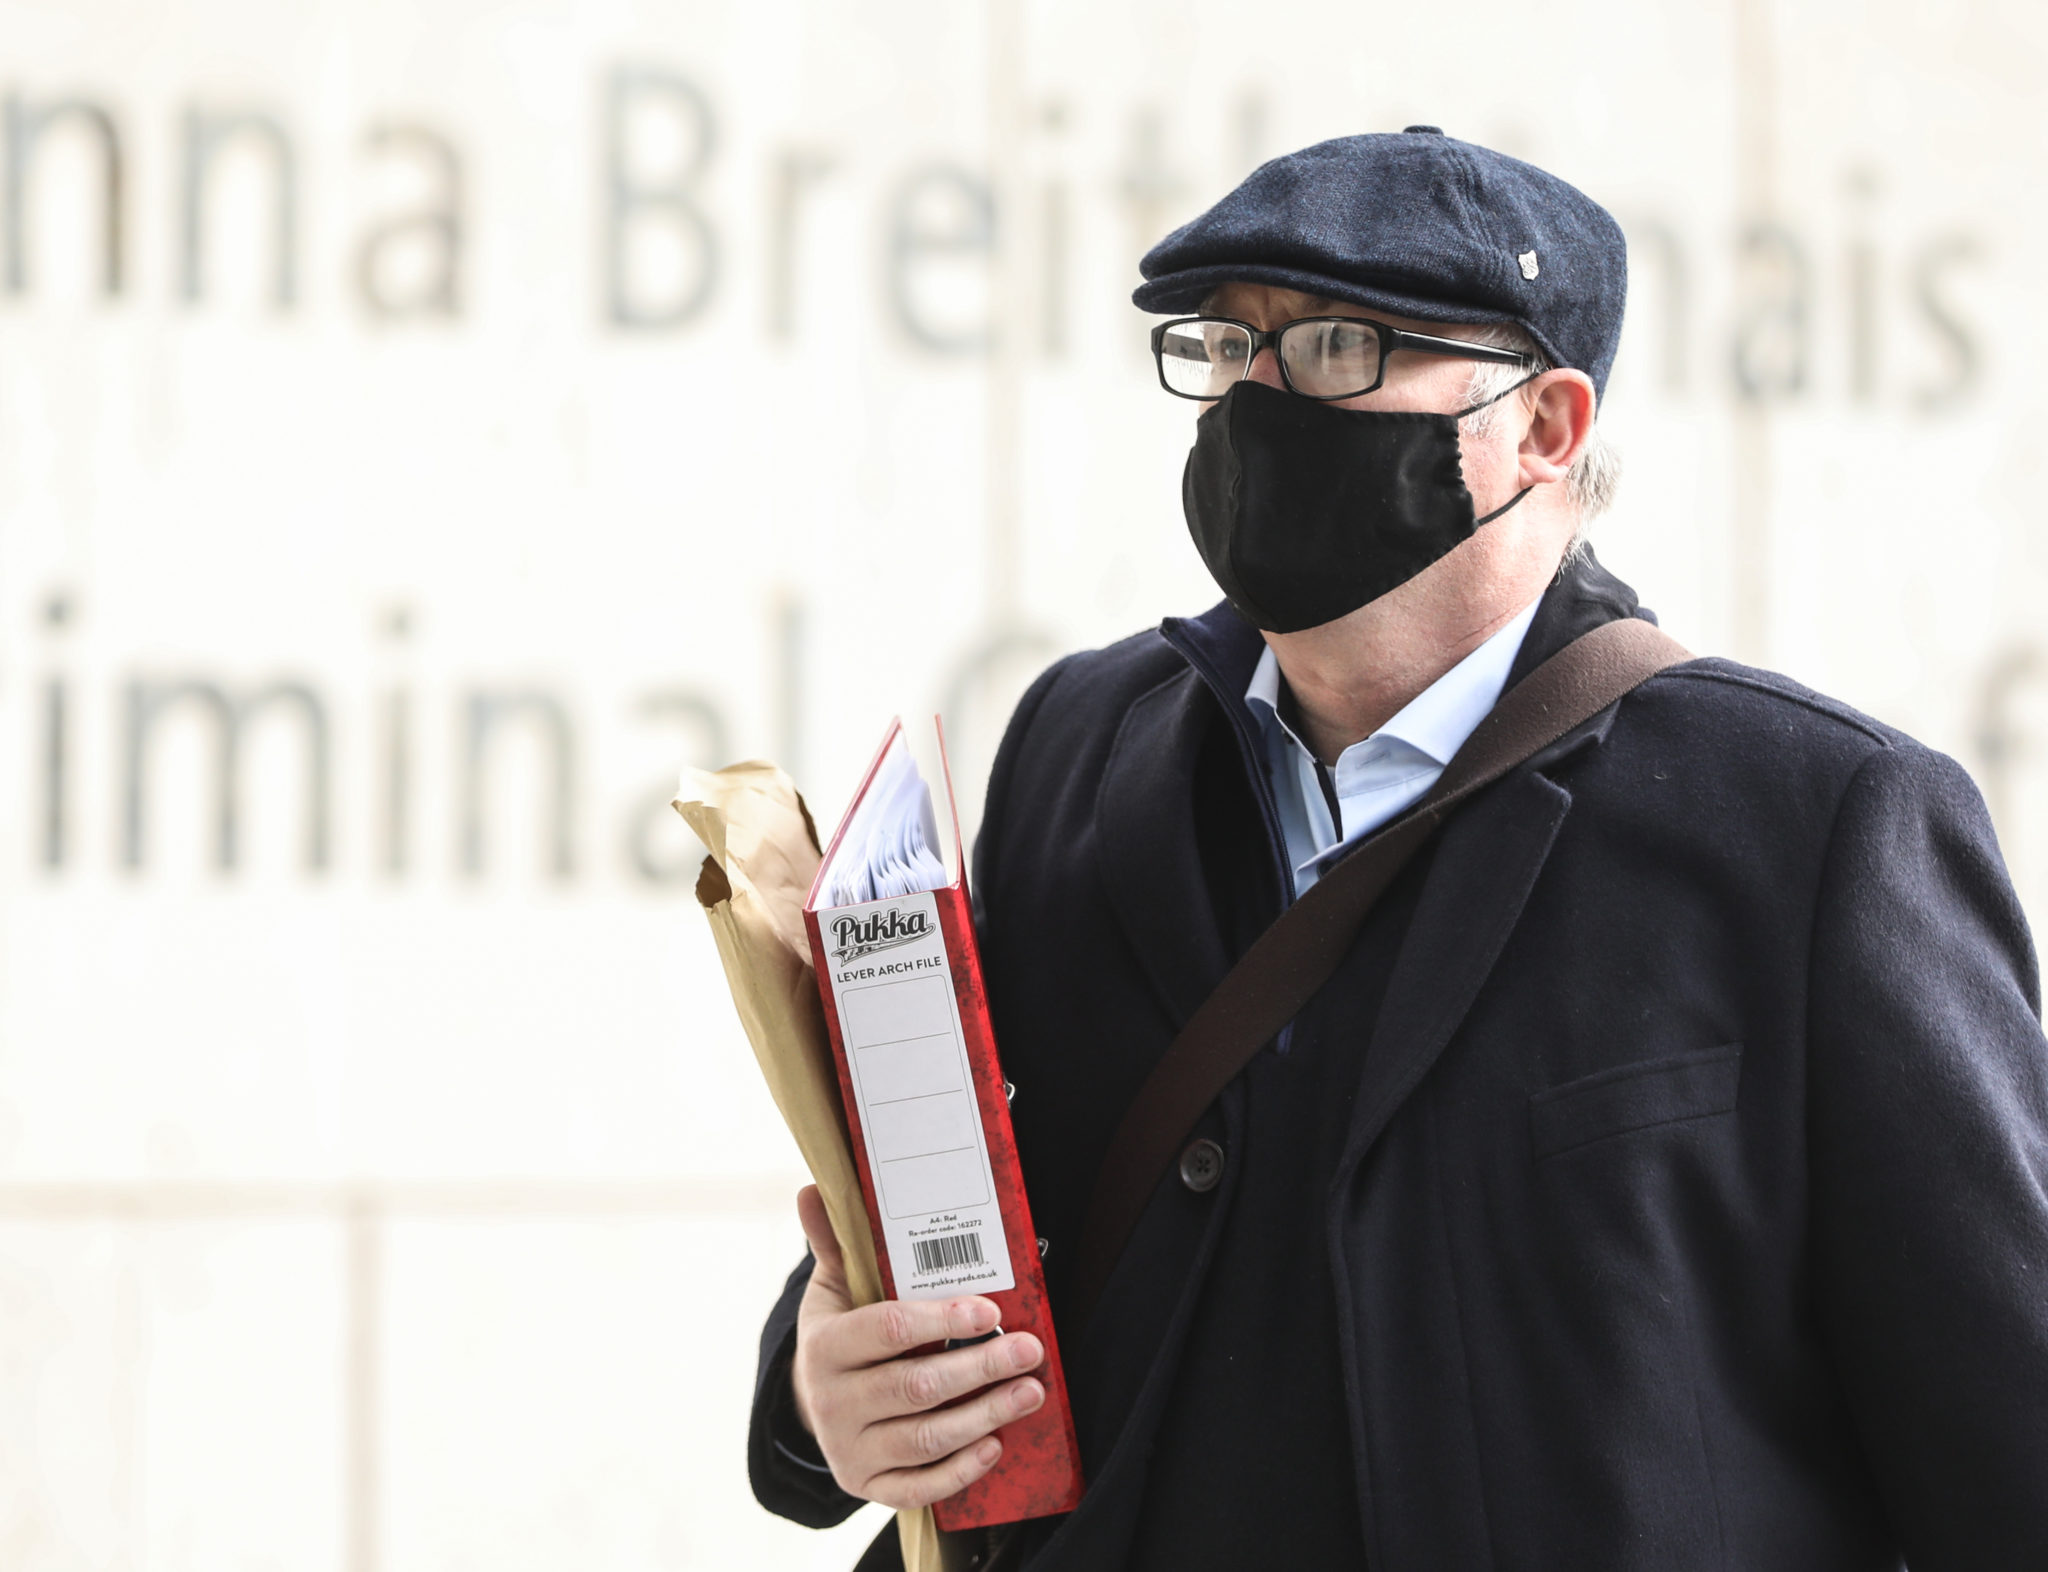 Former solicitor Michael Lynn wearing a face mask while arriving at the Criminal Courts of Justice